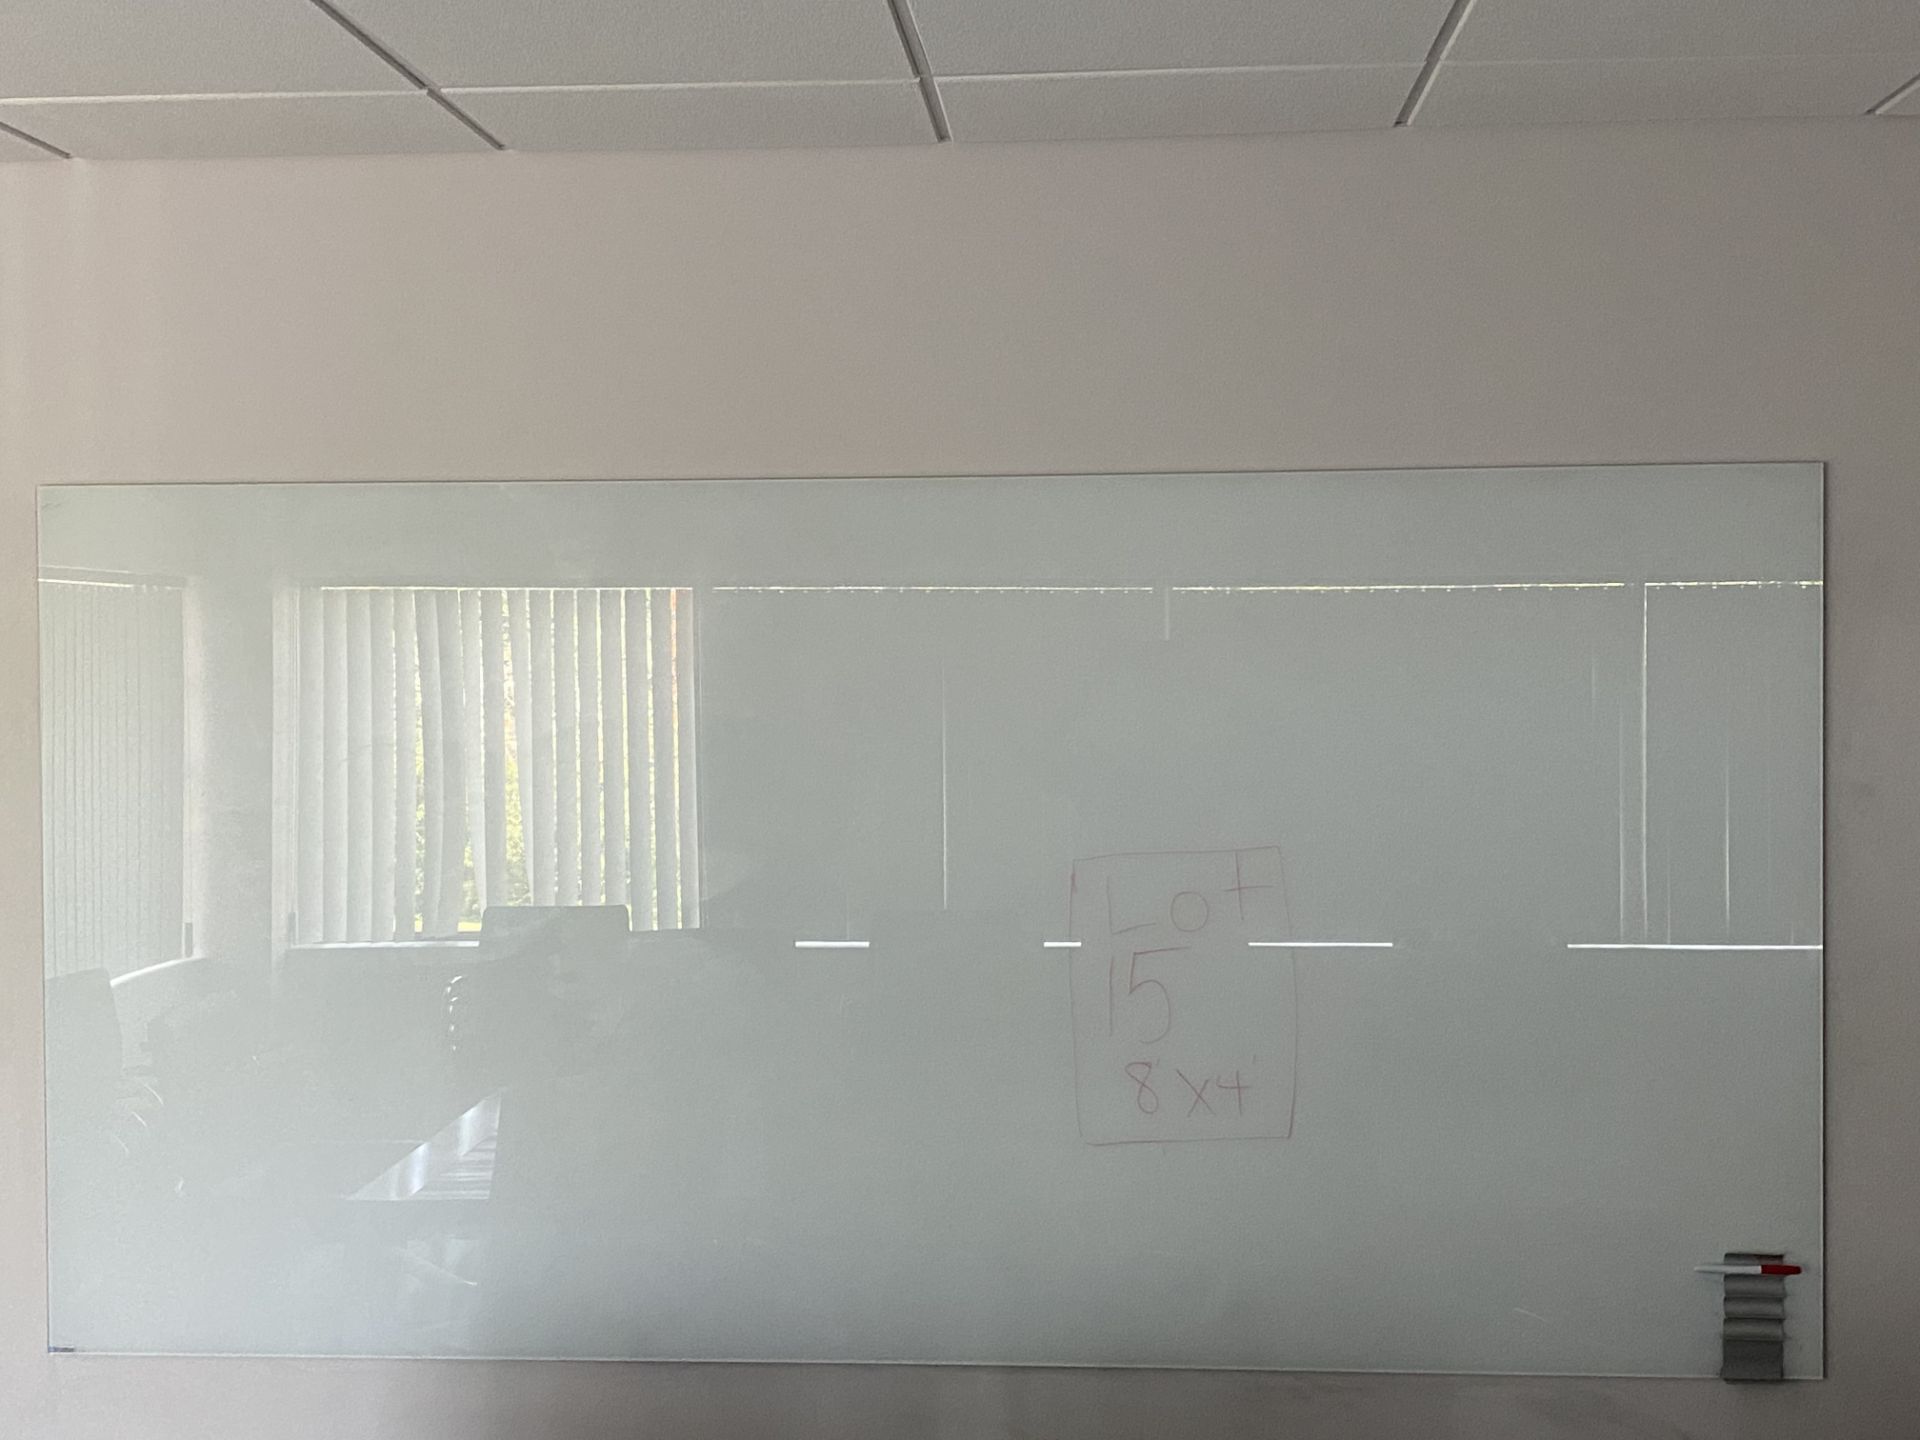 8' x 4' Clarus Float Tempered Glassboard 48"H x 98"W x 1/4" Thick, Pure White C100, Type PPG Star